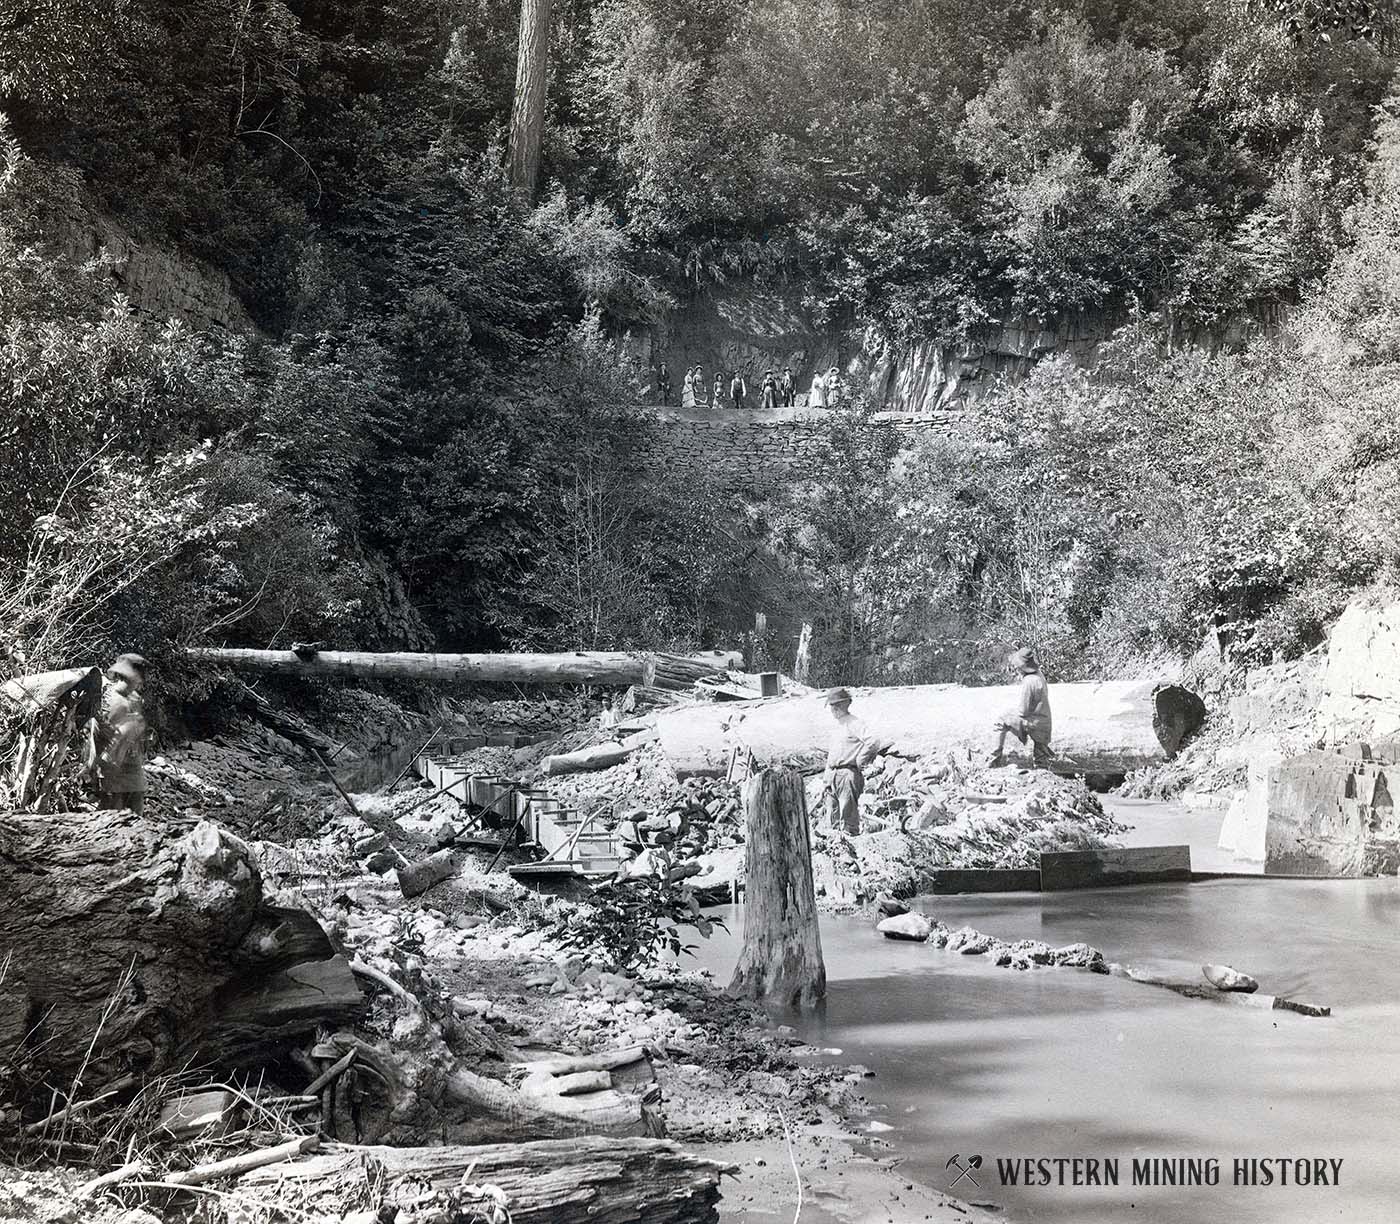 Flume at the Young America Mine ca. 1895